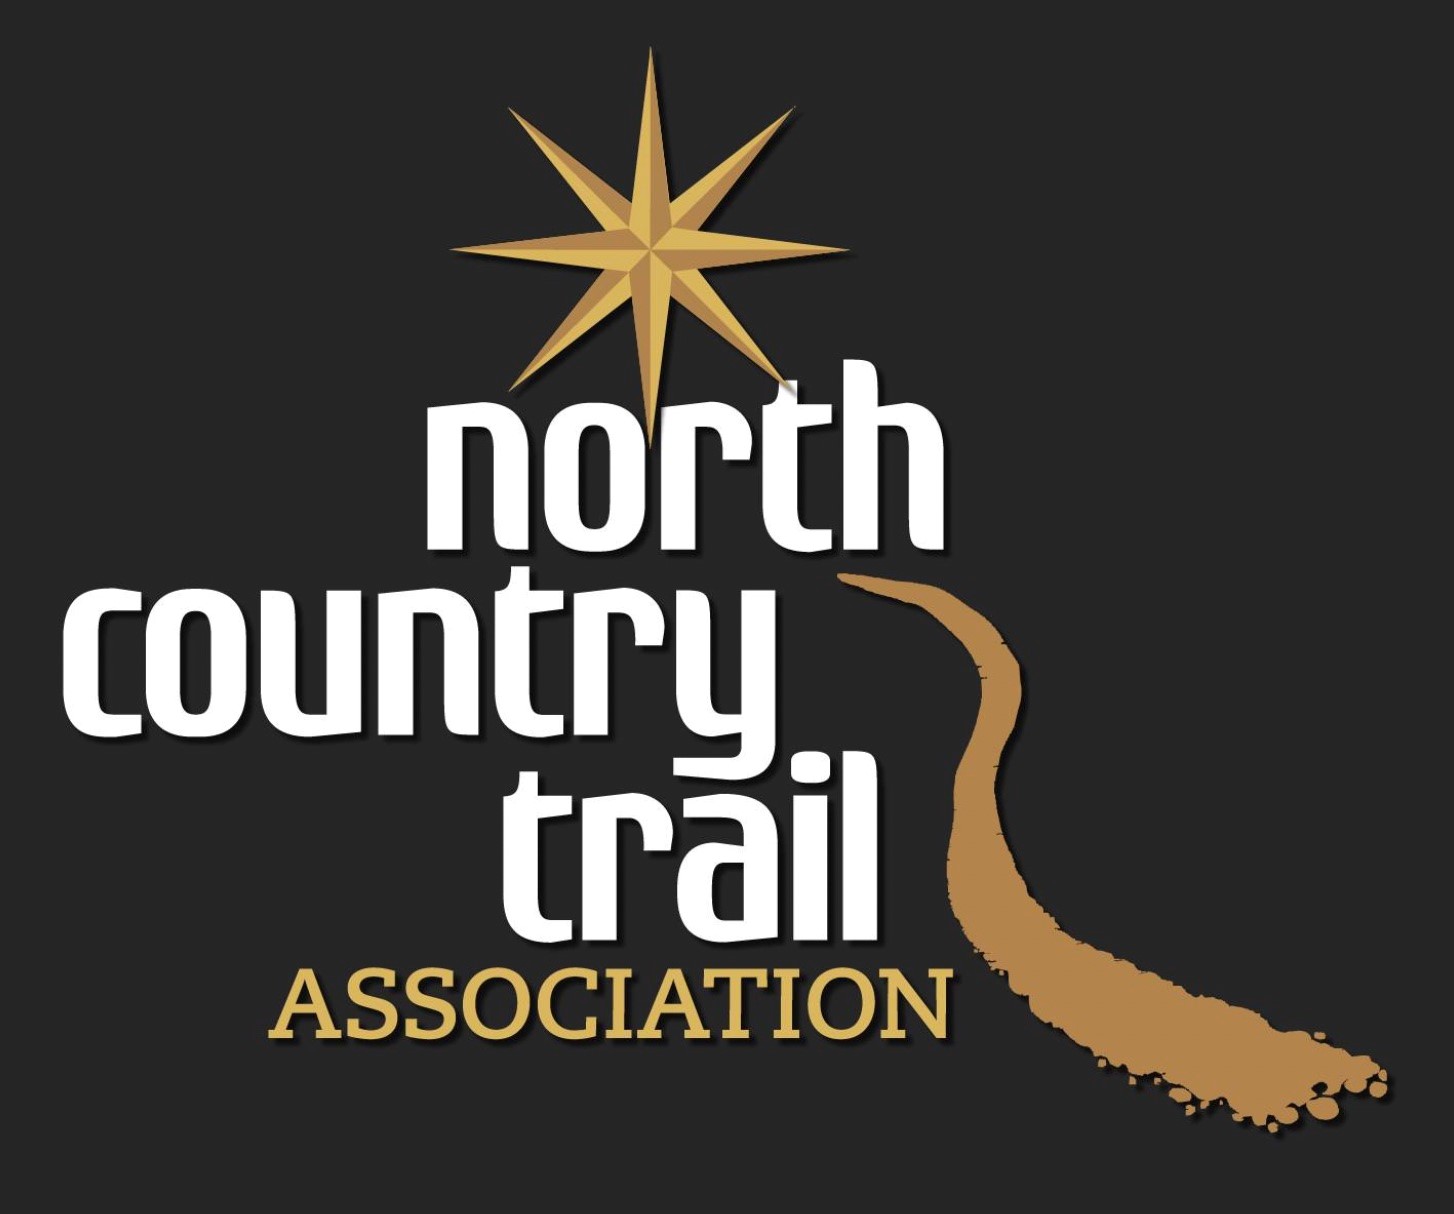 North country trail association logo